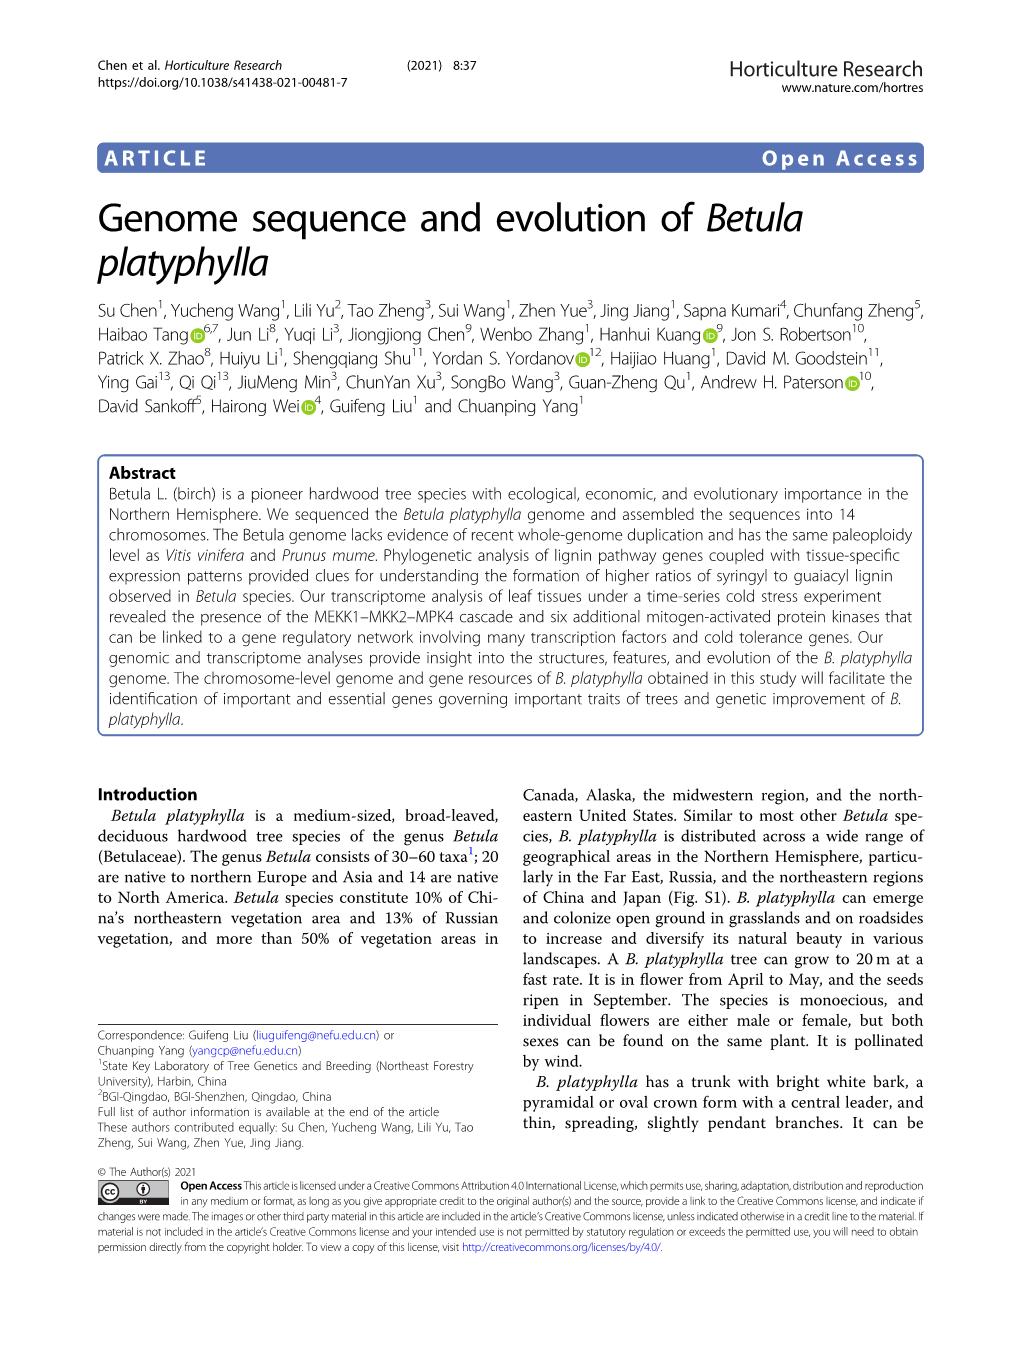 Genome Sequence and Evolution of Betula Platyphylla